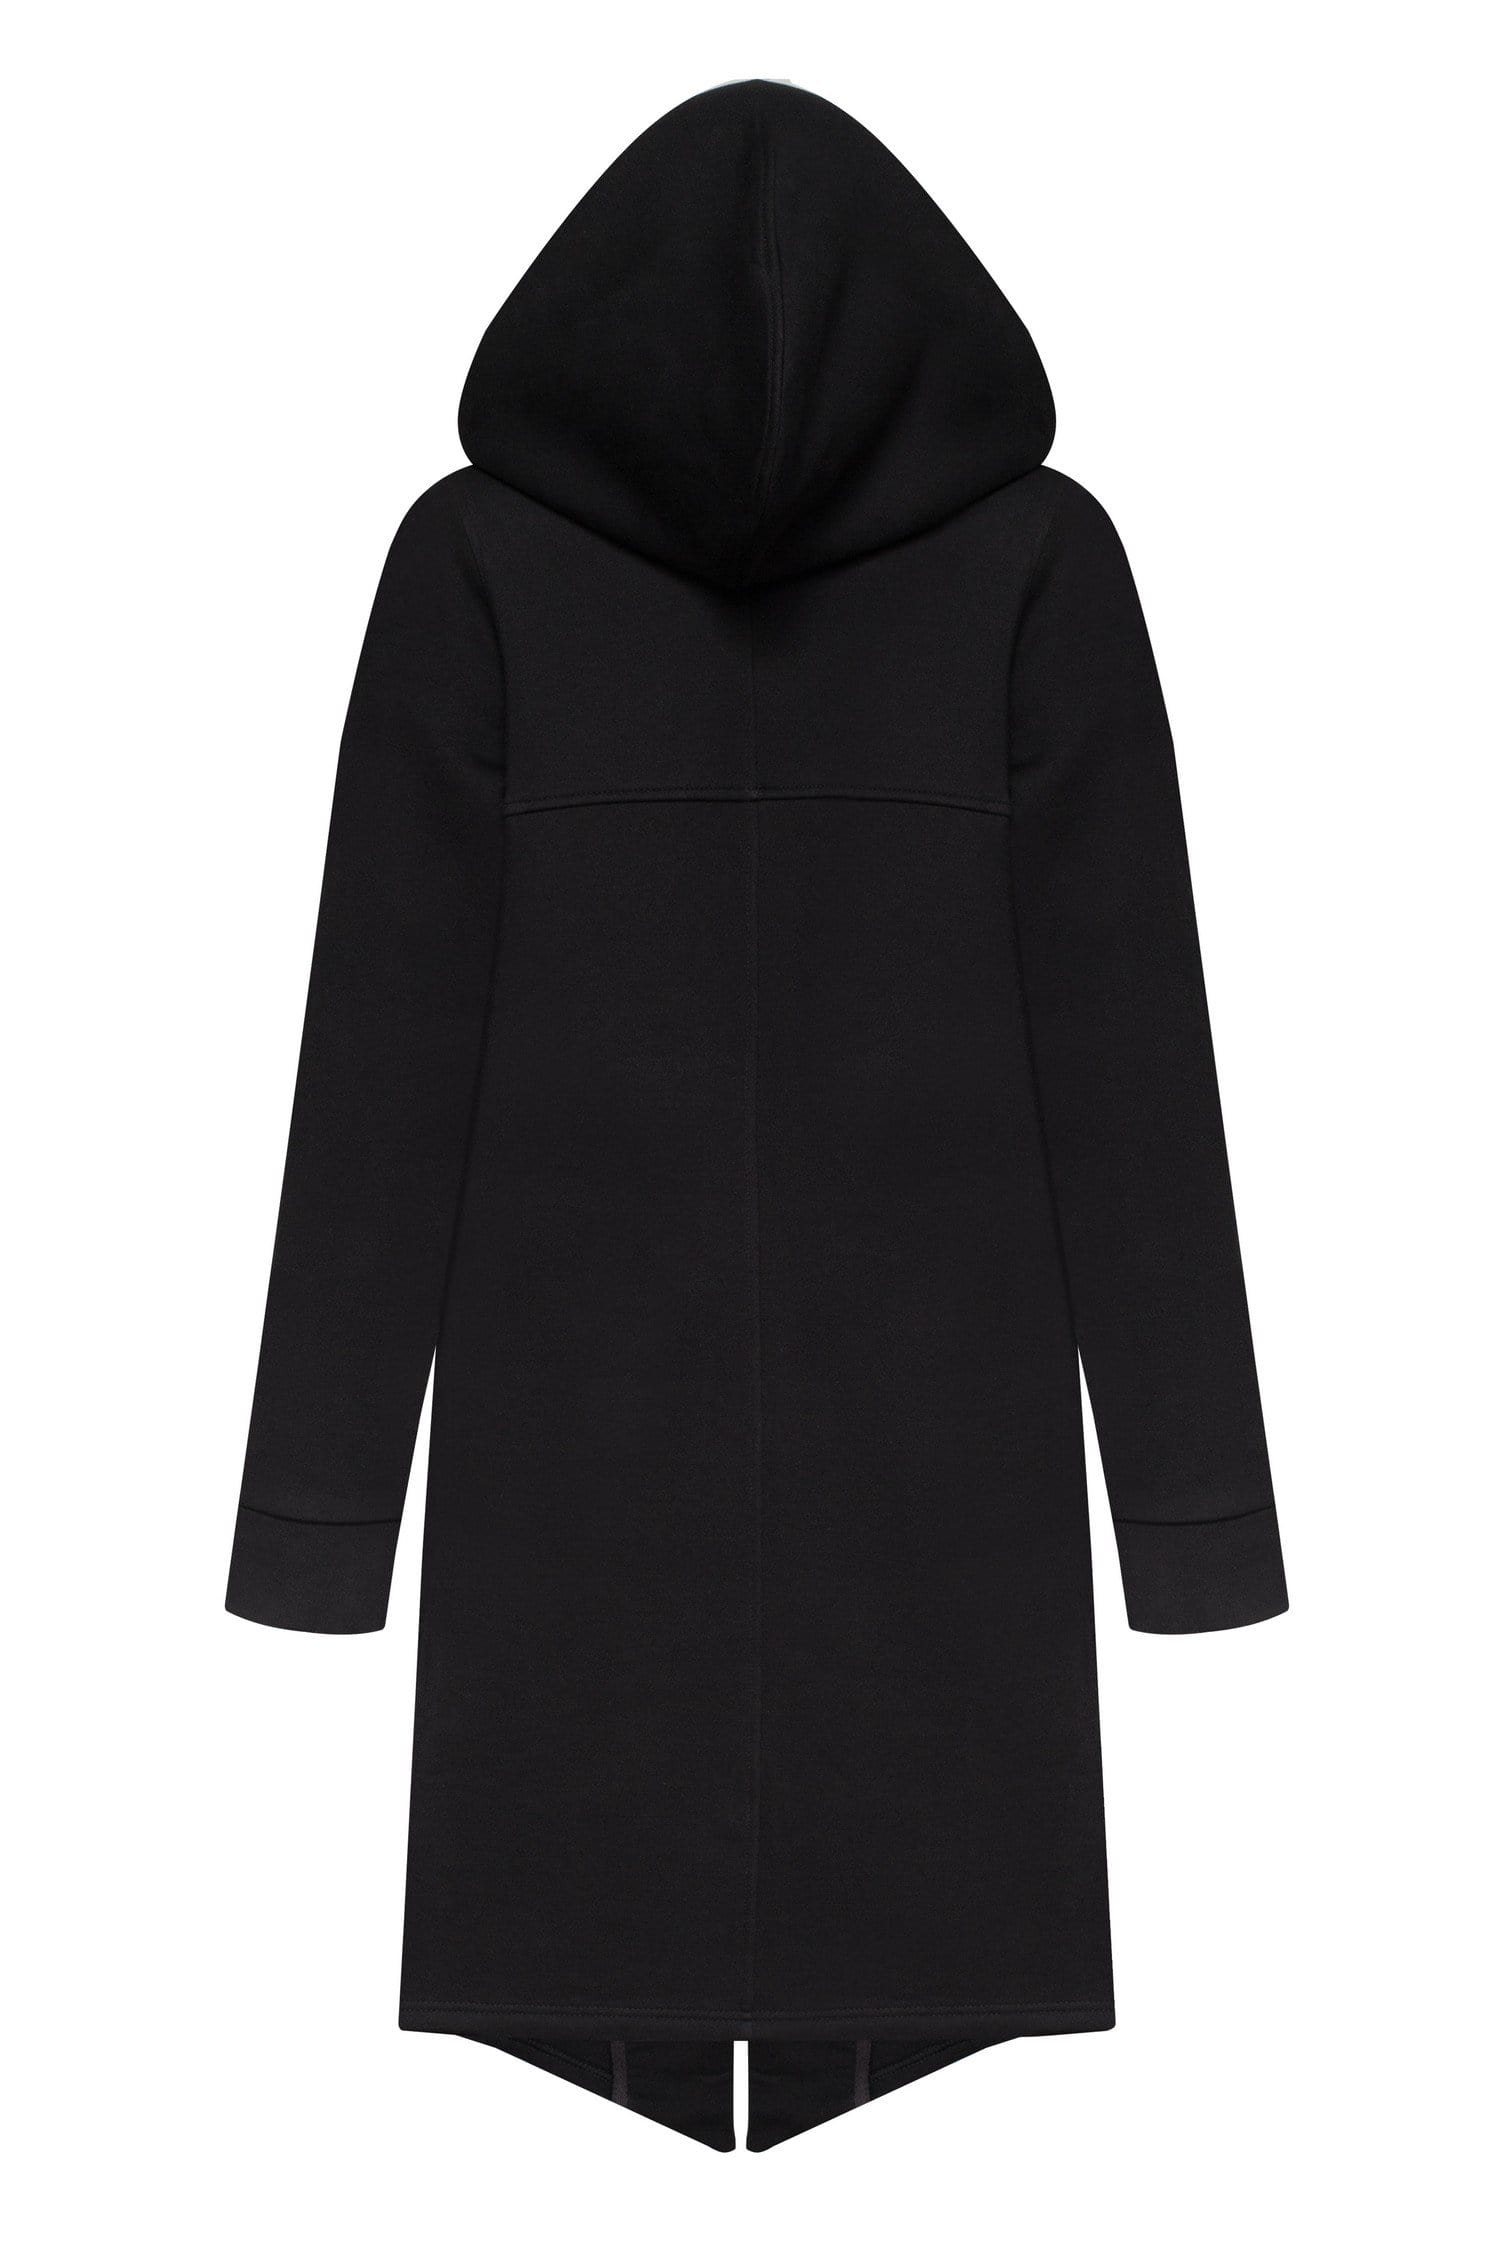 MDNT45 Coats & Jackets for Woman Unisex hooded cloak